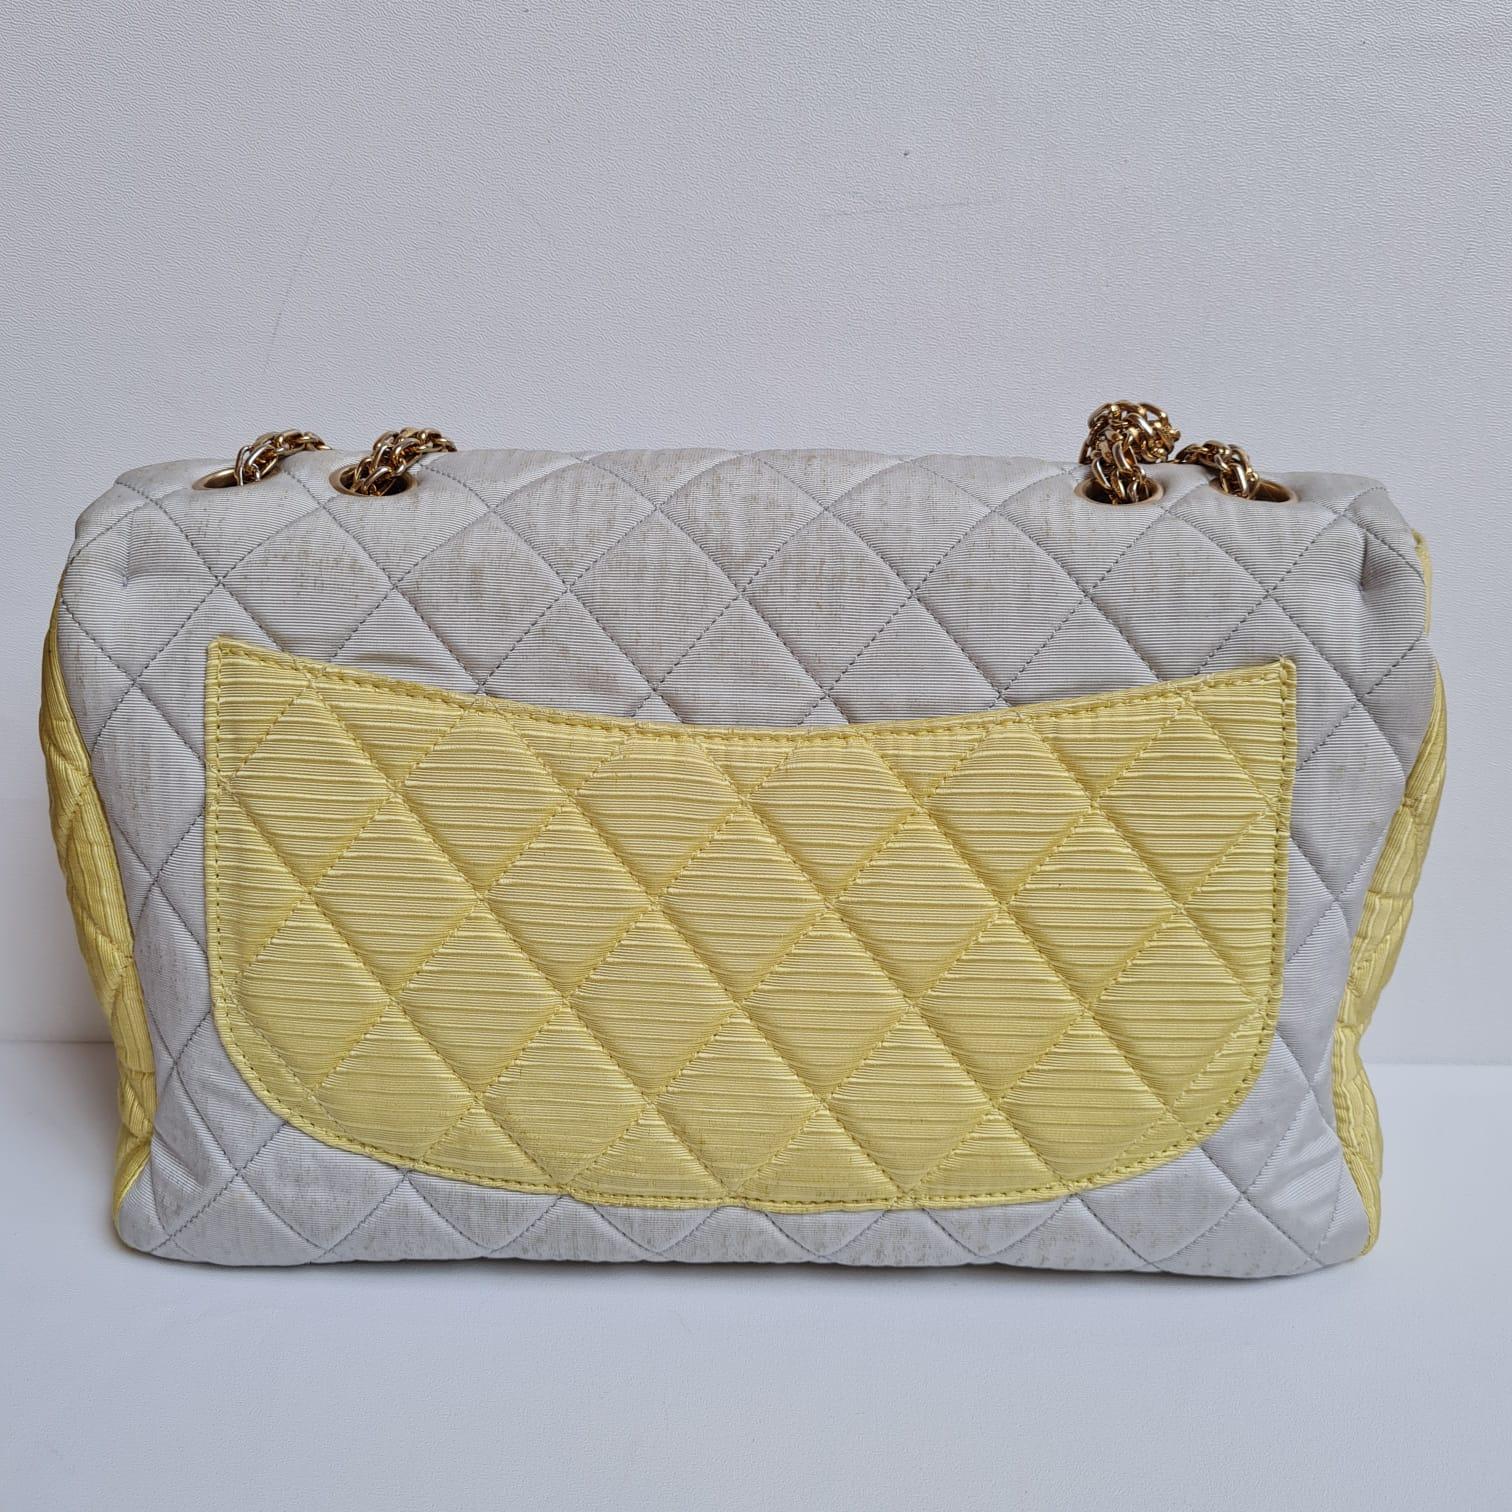 Chanel Pastel Tricolor 2.55 Canvas Quilted 227 Reissue Flap Bag For Sale 11